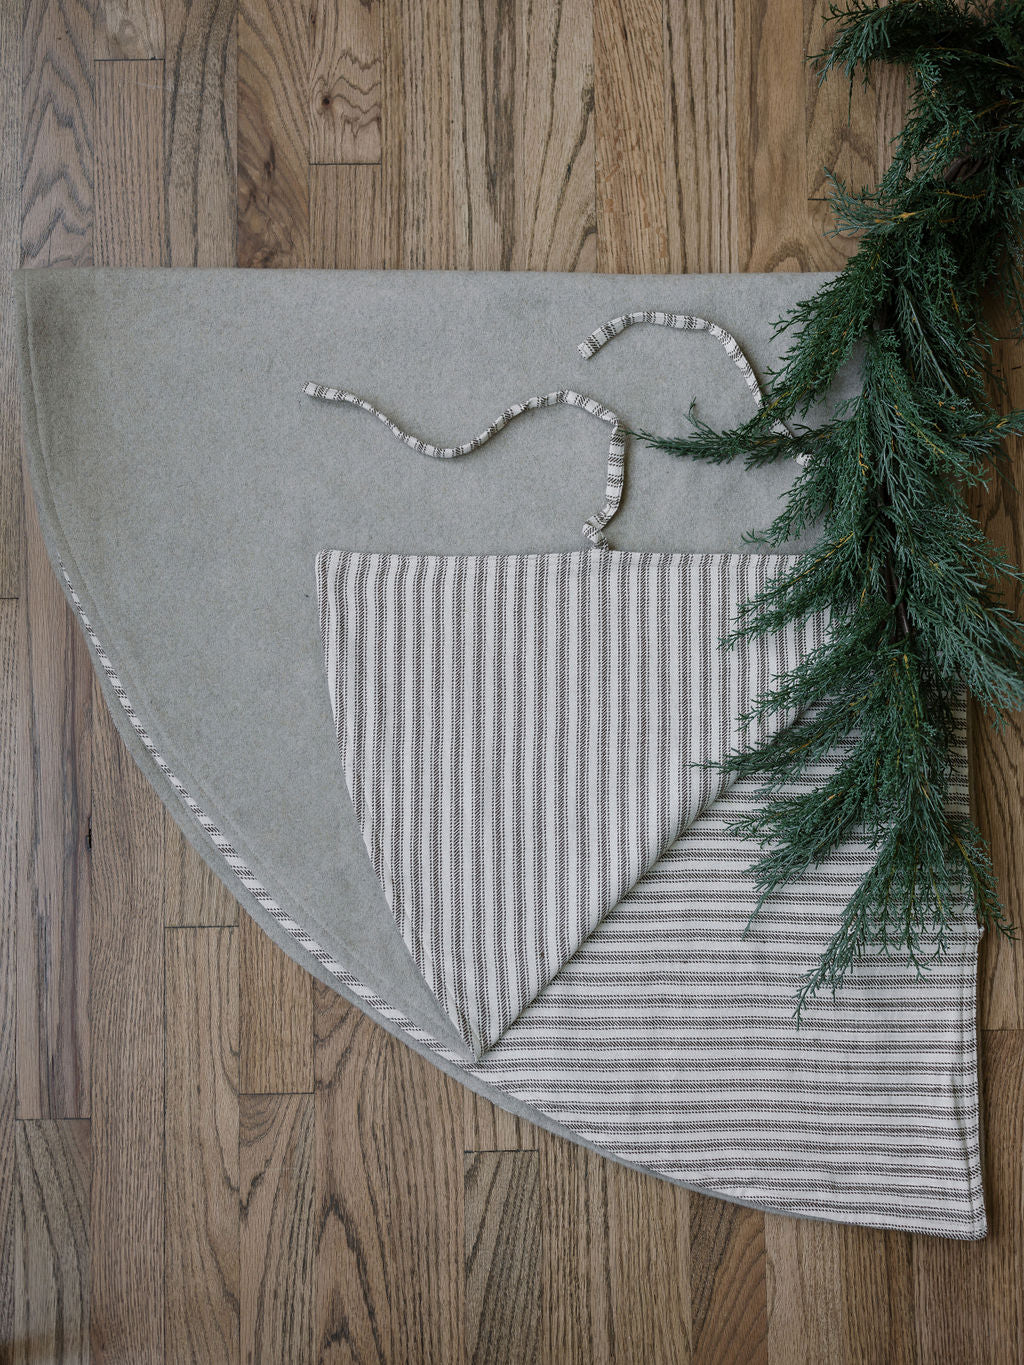 60" Reversible Tree Skirt with a European Ticking and a Natural Wool